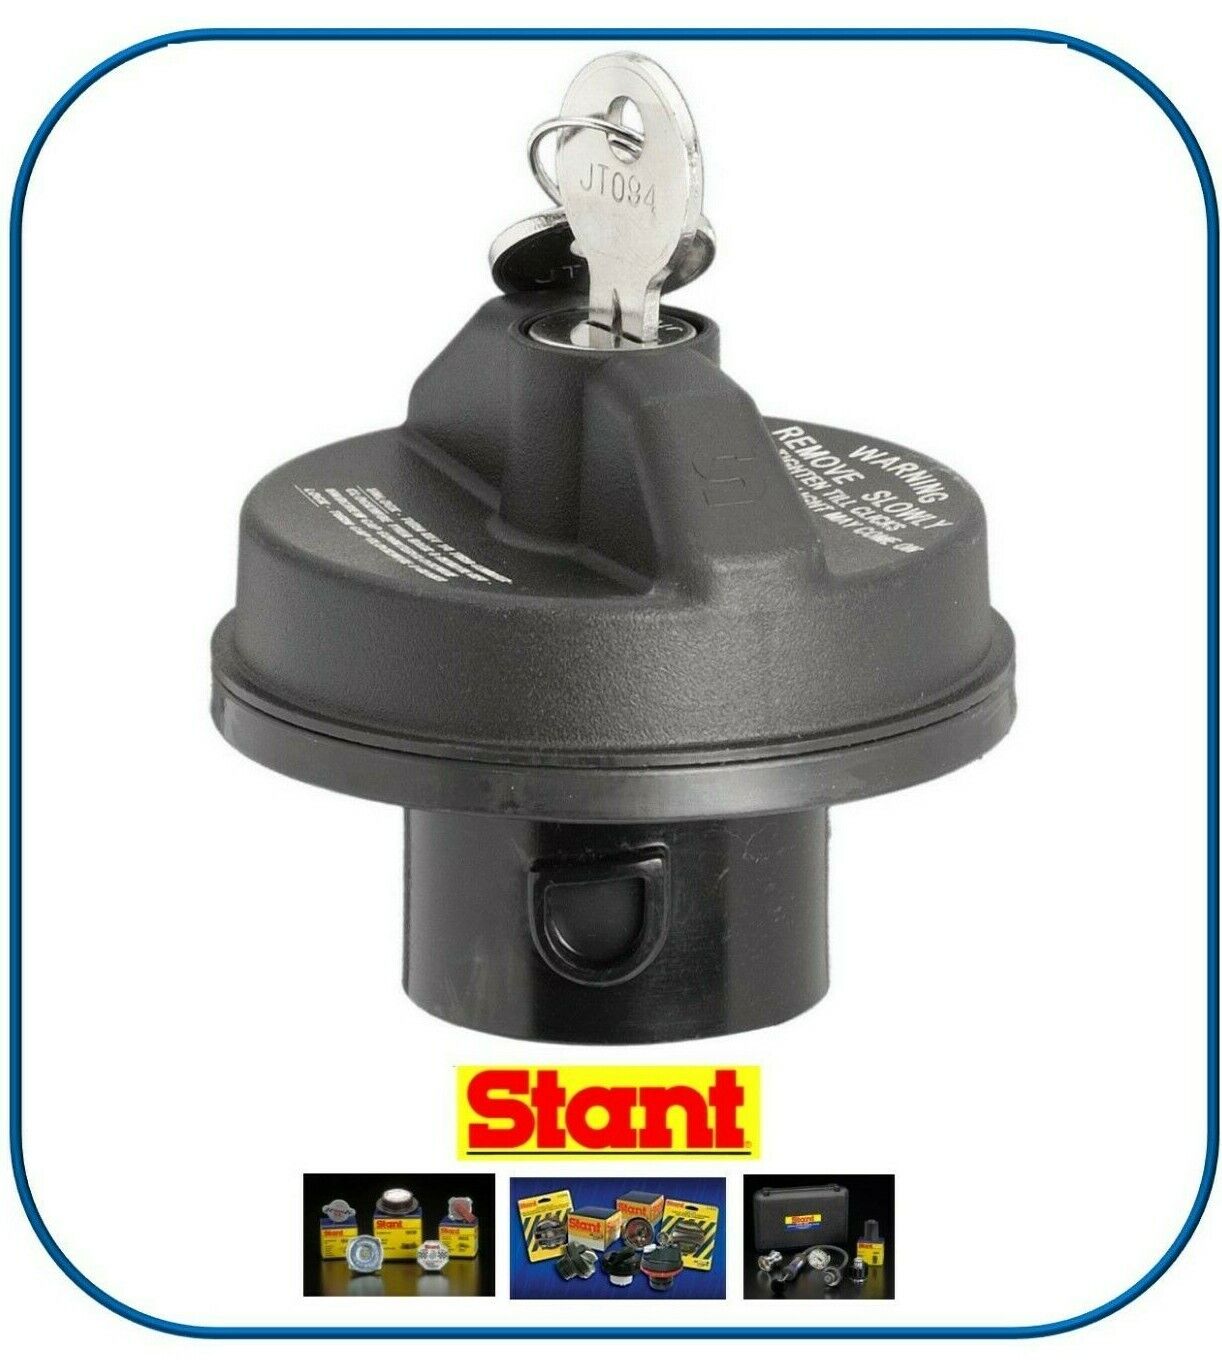 STANT 10506 Type Locking Fuel / Gas Cap for Fuel Tank OE Replacement Genuine 